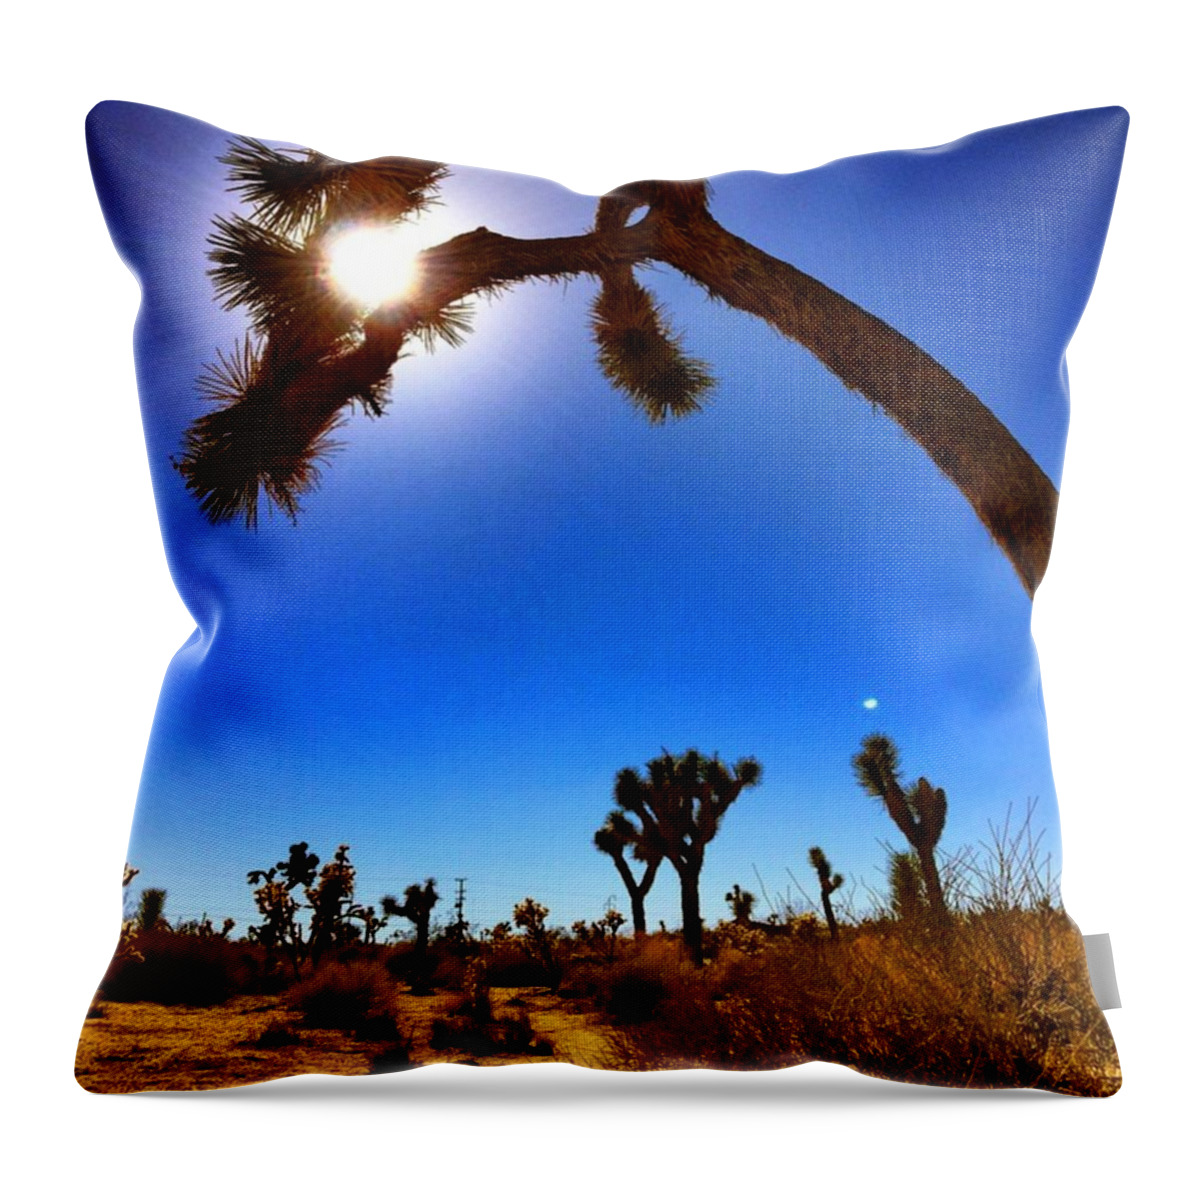 Joshuatree Throw Pillow featuring the photograph #fourwinds Annual #gathering Of by Gary Sumner